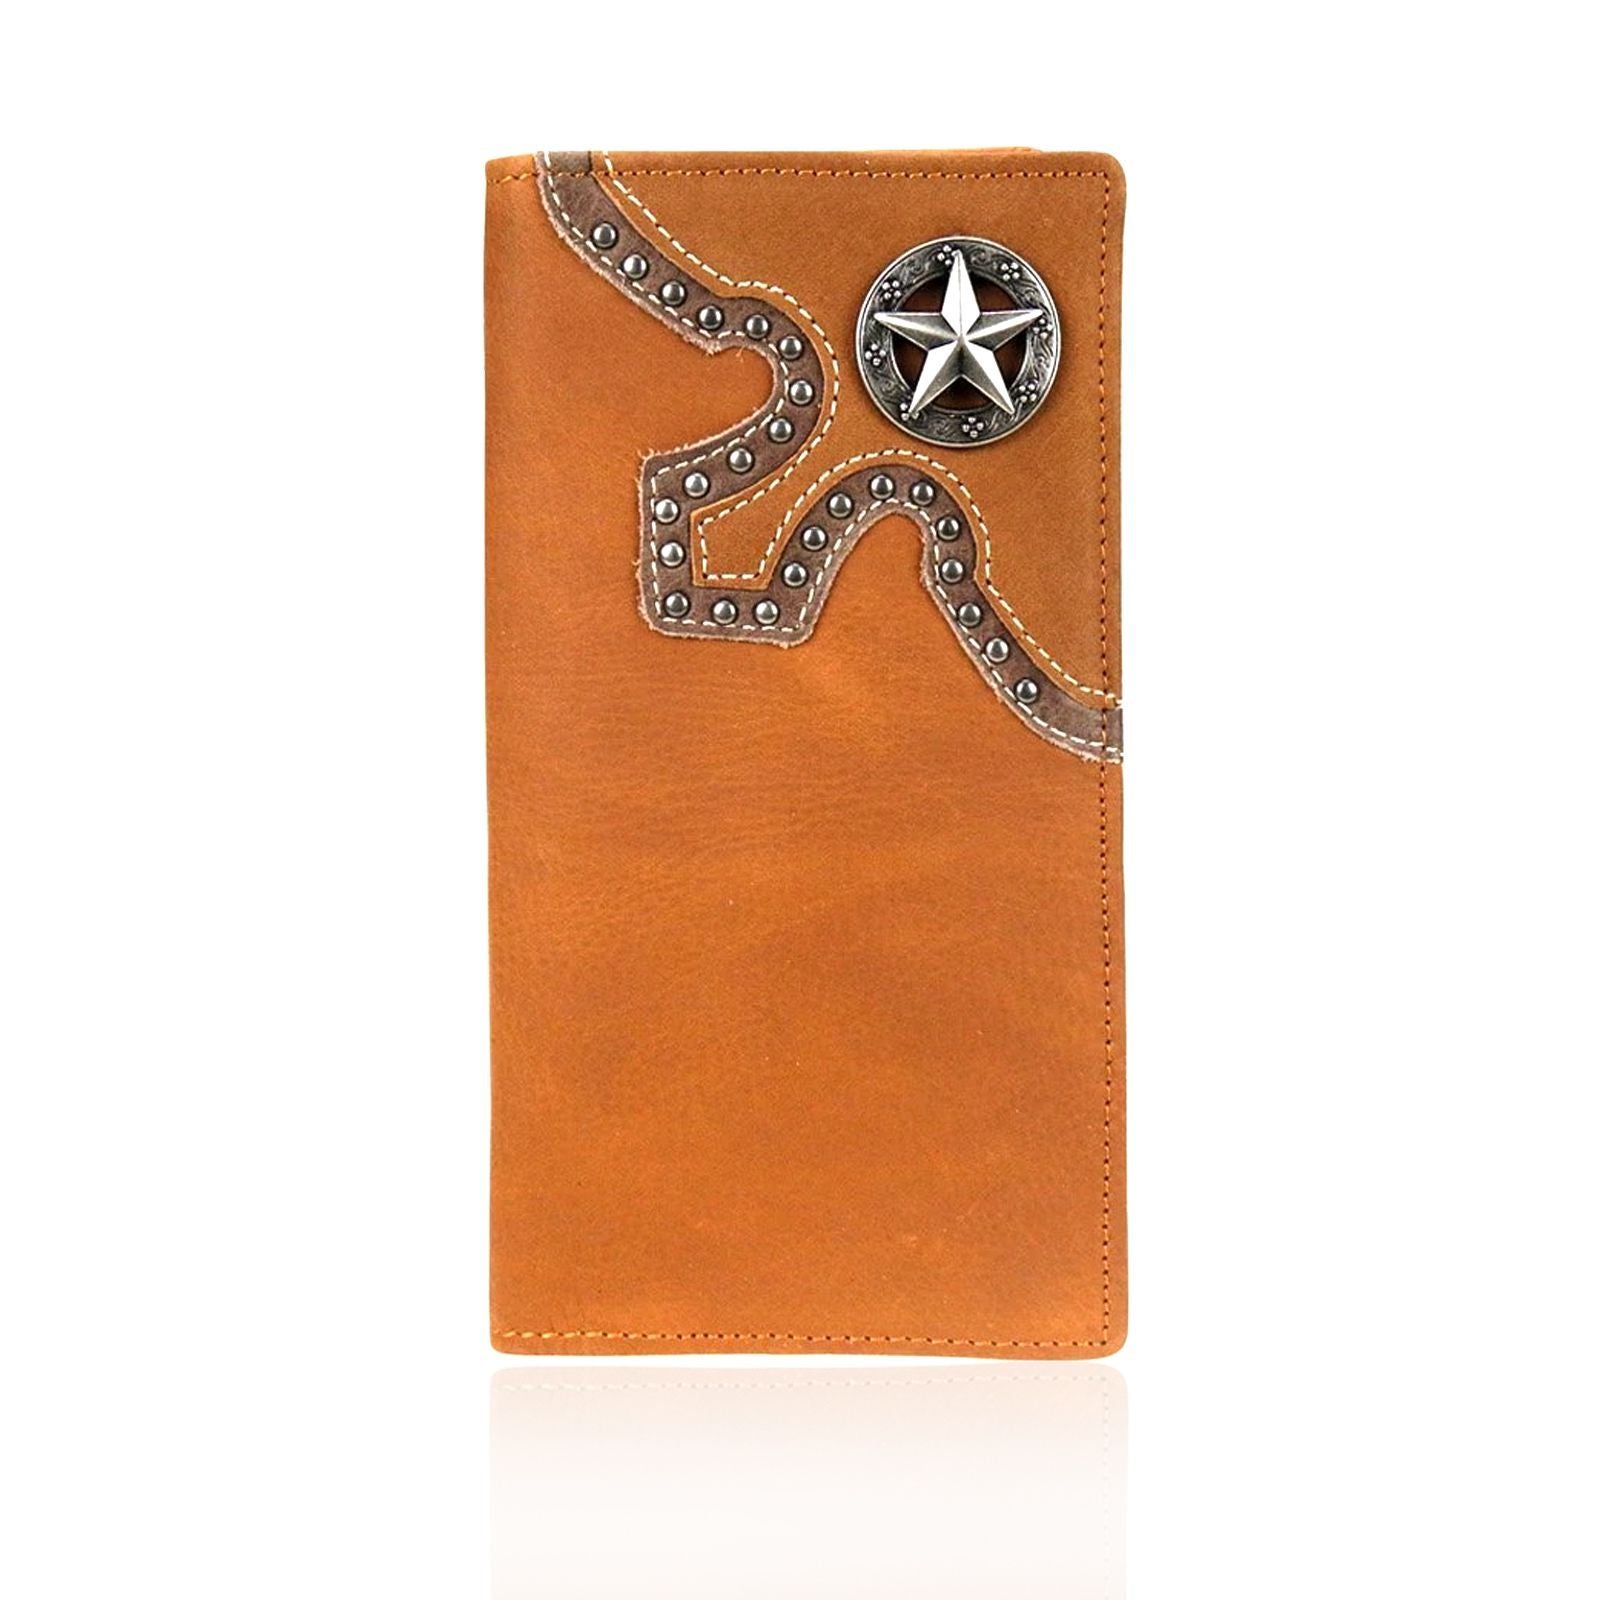 Genuine-Leather-Lone-Star-Collection-Men's-Wallet-Brown